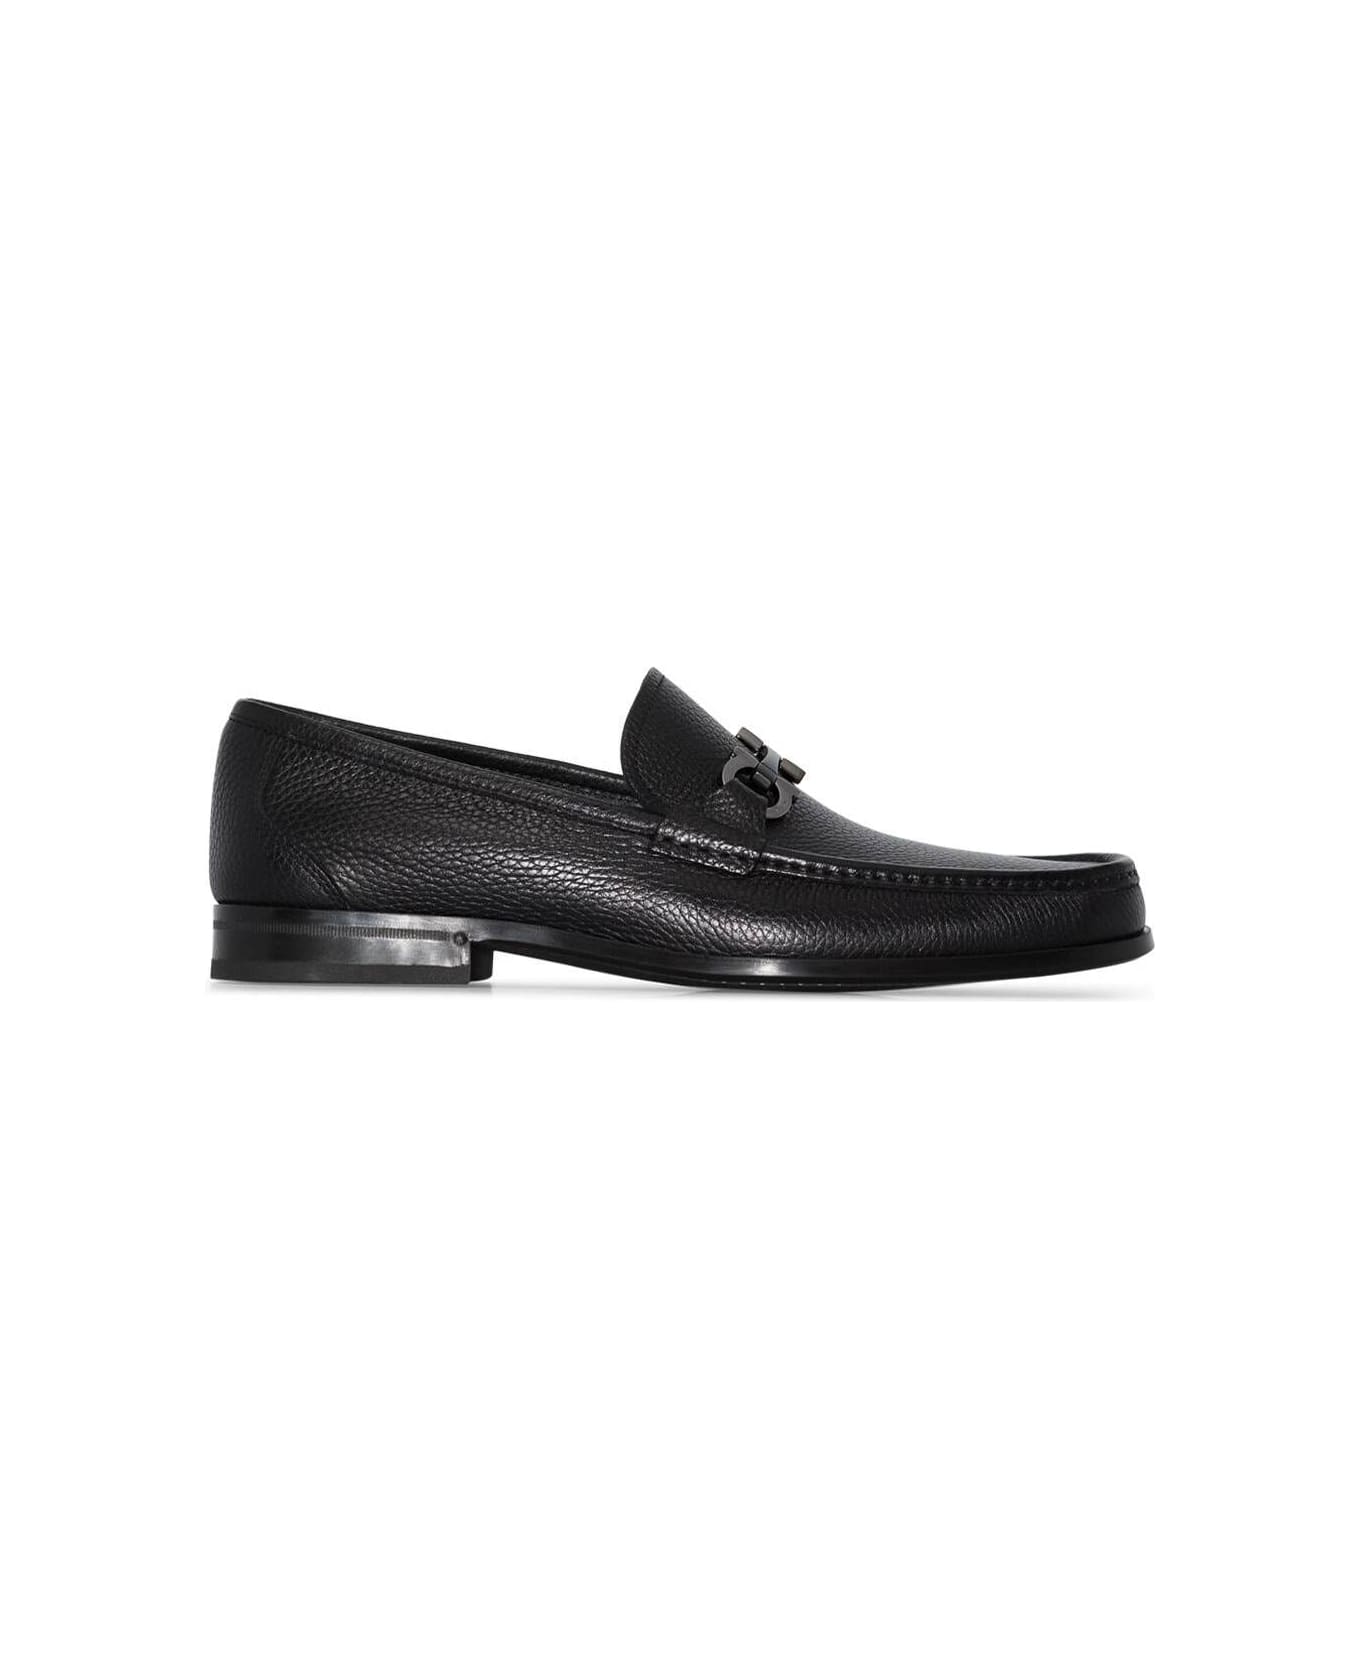 Ferragamo Black Loafers With Tonal Gancini Detail In Hammered Leather Man - Black ローファー＆デッキシューズ